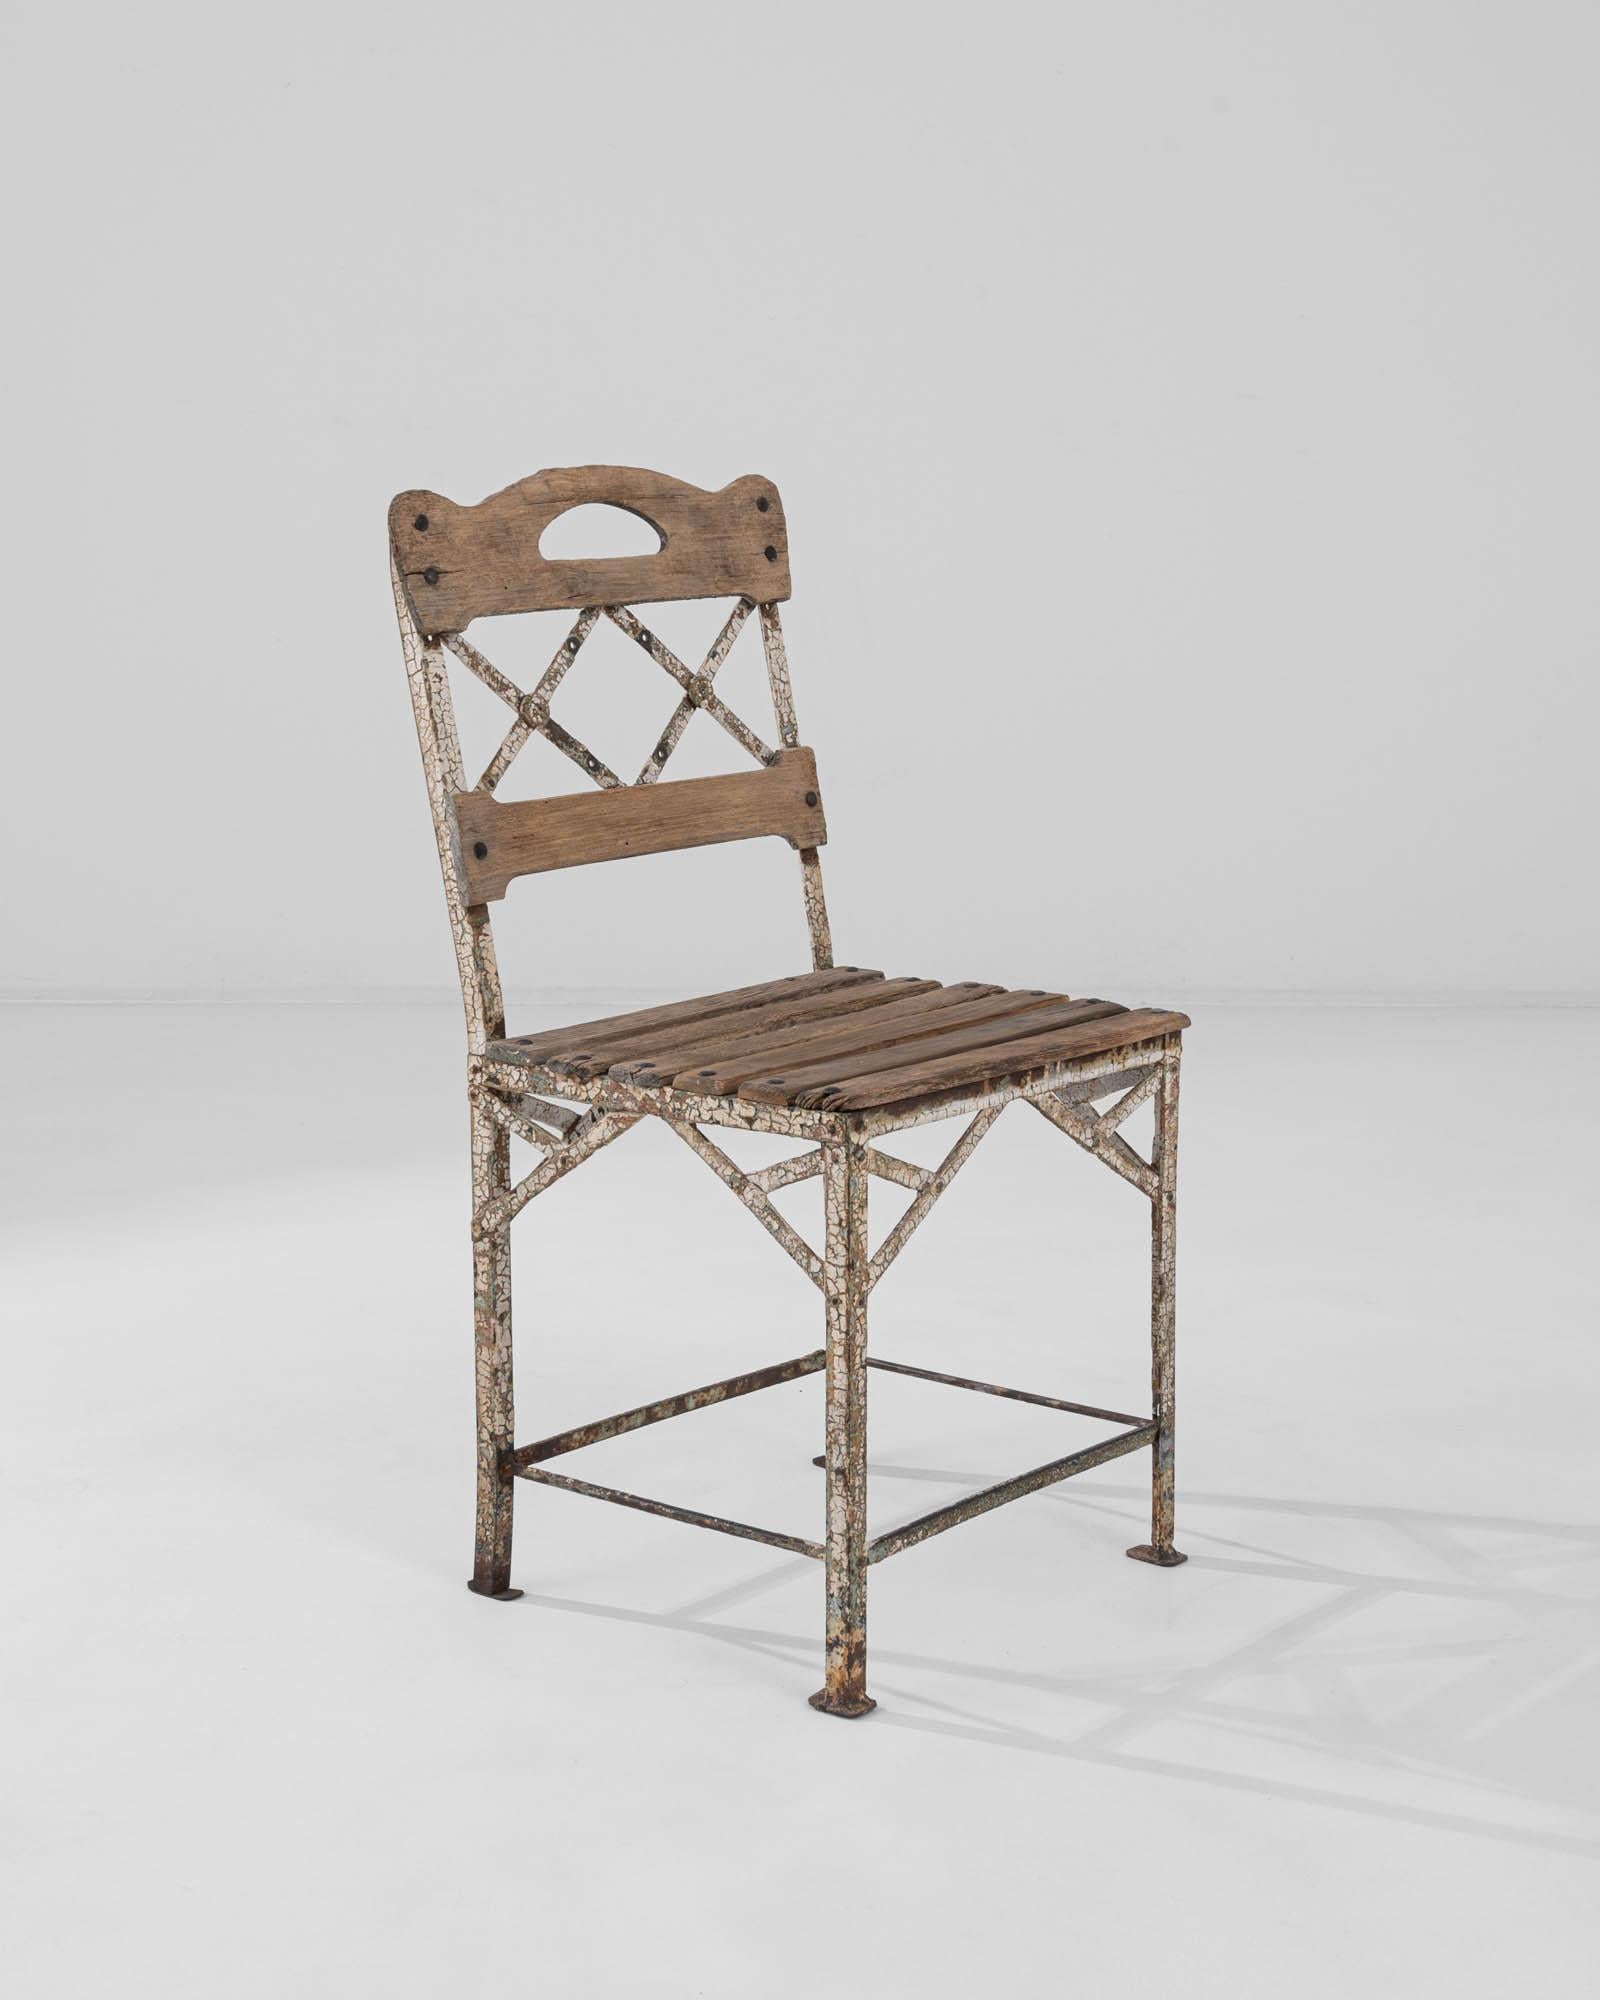 A wooden and metal chair created in 20th century France. Weathered and cracked through time, this chair retains its original dignity with a kind of maturity only earned through the years. The criss-crossing bands of metal that compose its structure